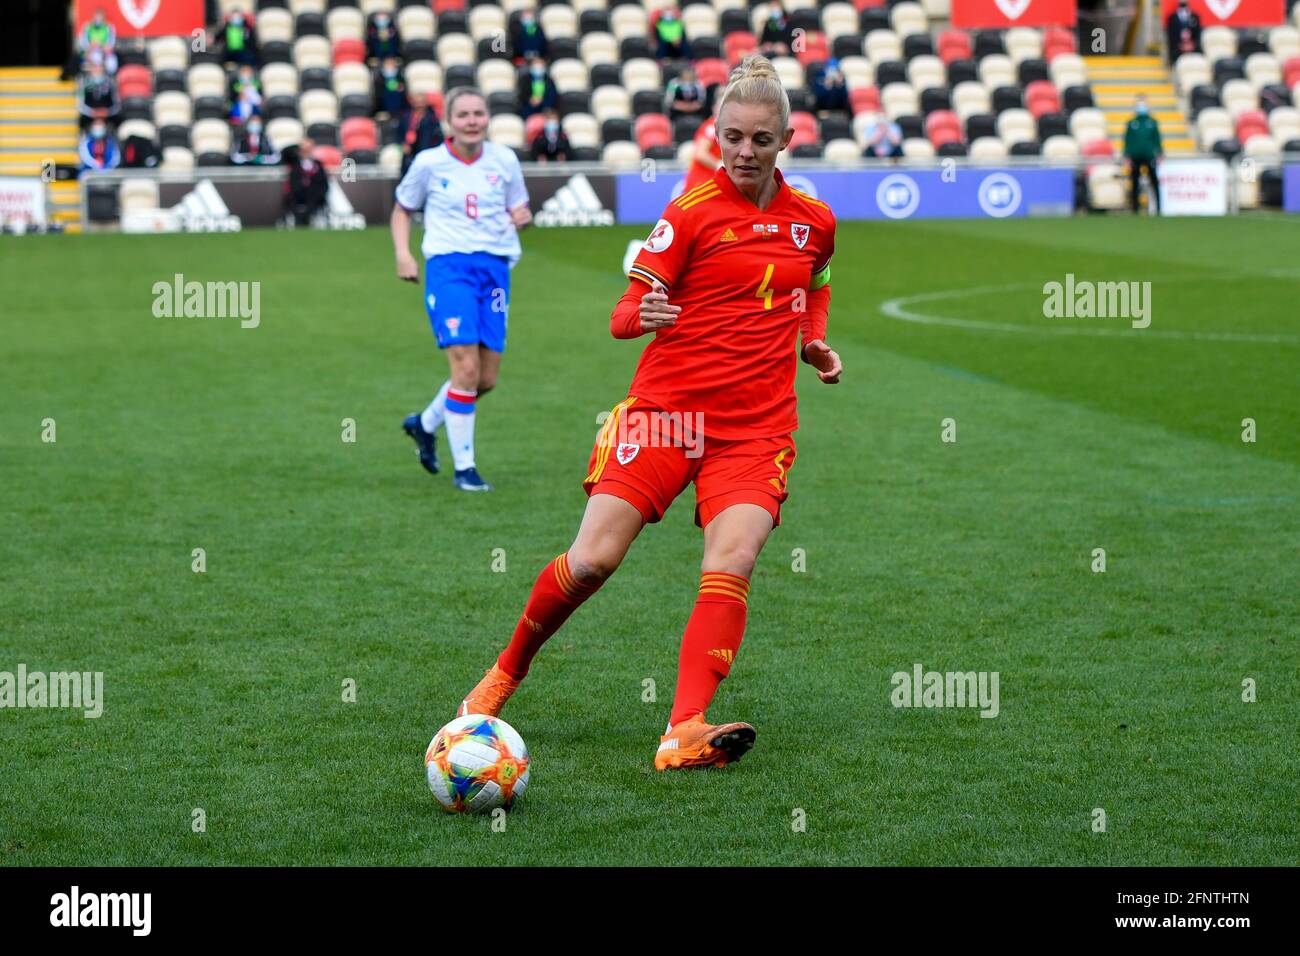 Newport, Wales. 22 October, 2020. Sophie Ingle of Wales Women in action during the UEFA Women's European Championship 2020 Qualifying Group C match between Wales and Faroe Islands Women at the Rodney Parade in Newport, Wales, UK on 22, October 2020. Credit: Duncan Thomas/Majestic Media. Stock Photo